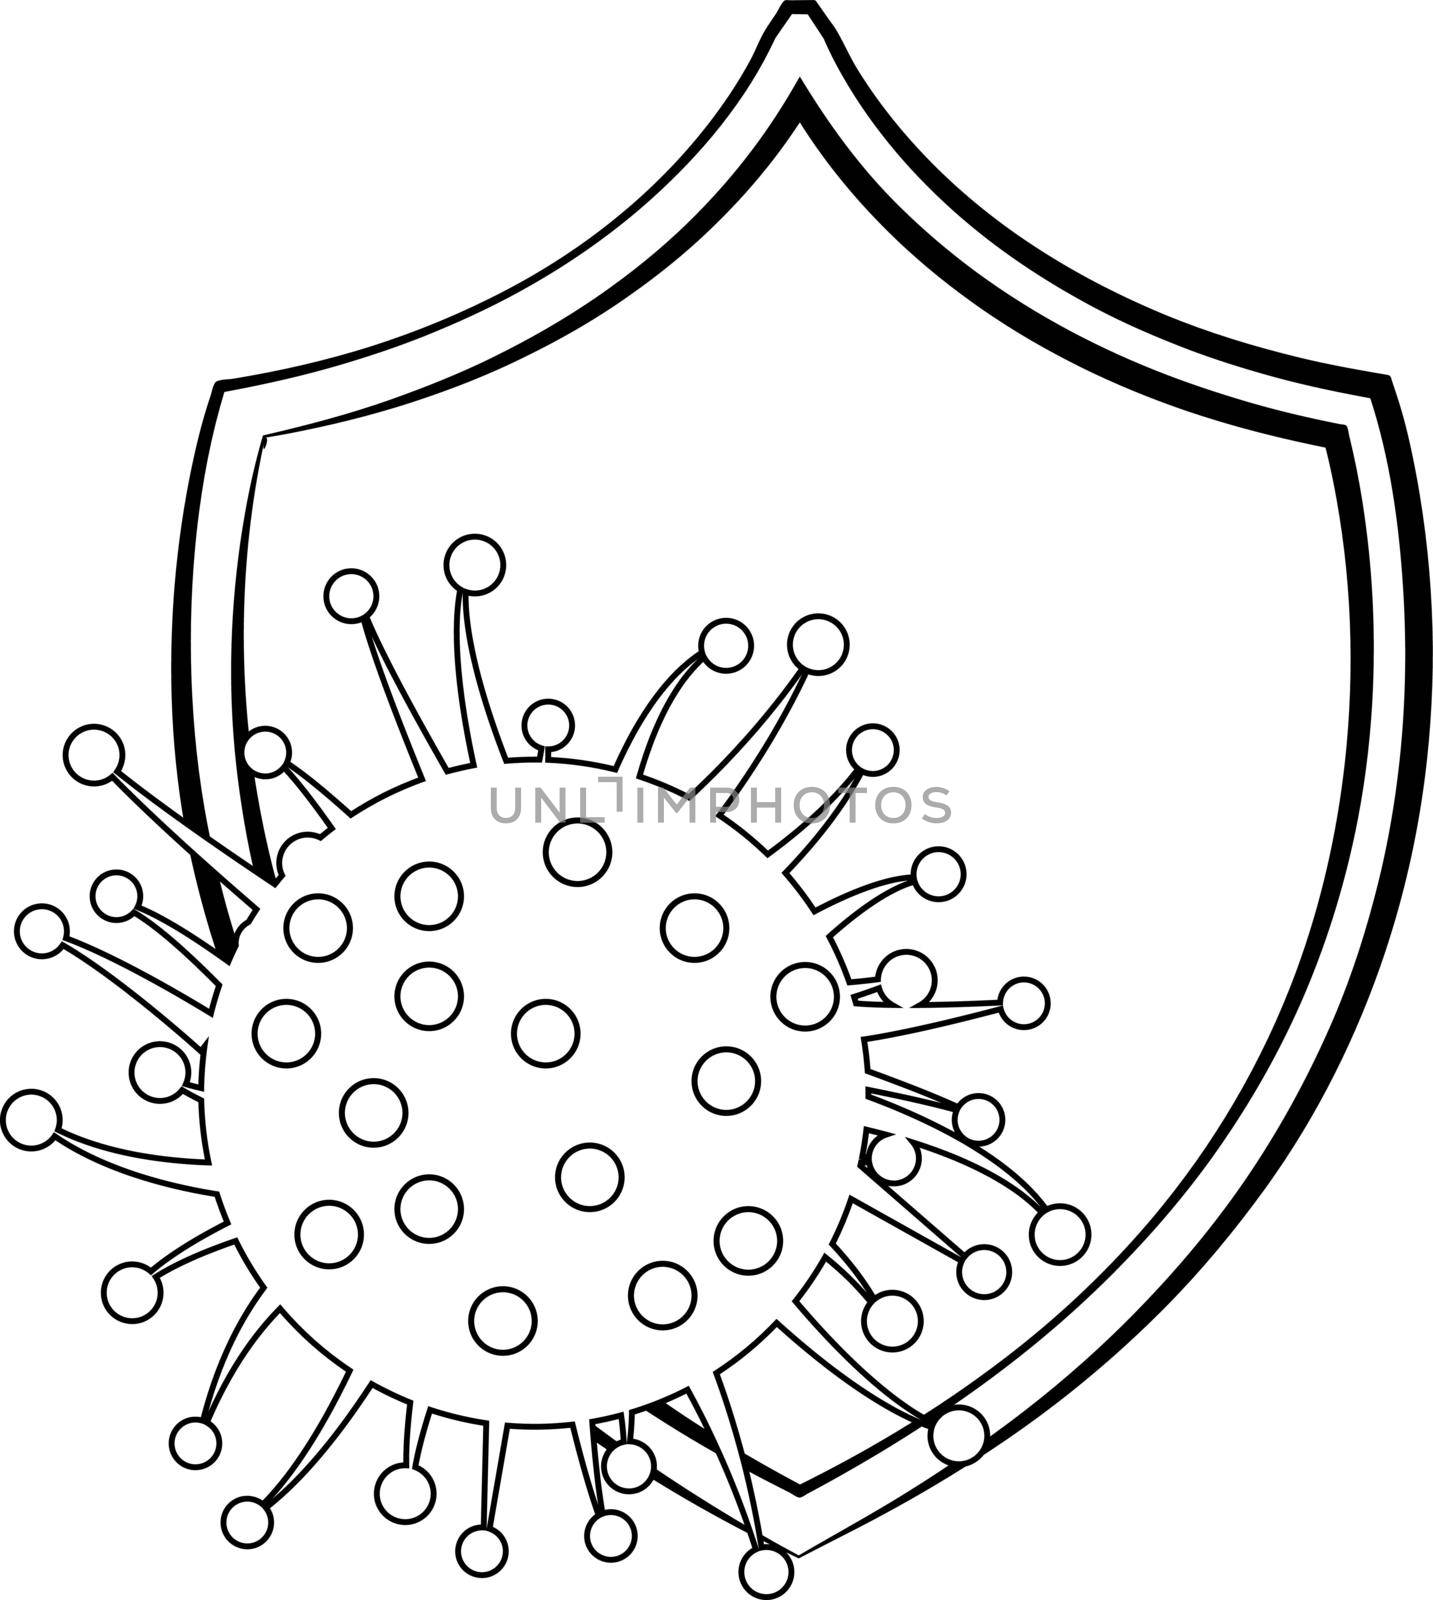 Antivirus shield outline sign vector illustration on a white background isolated